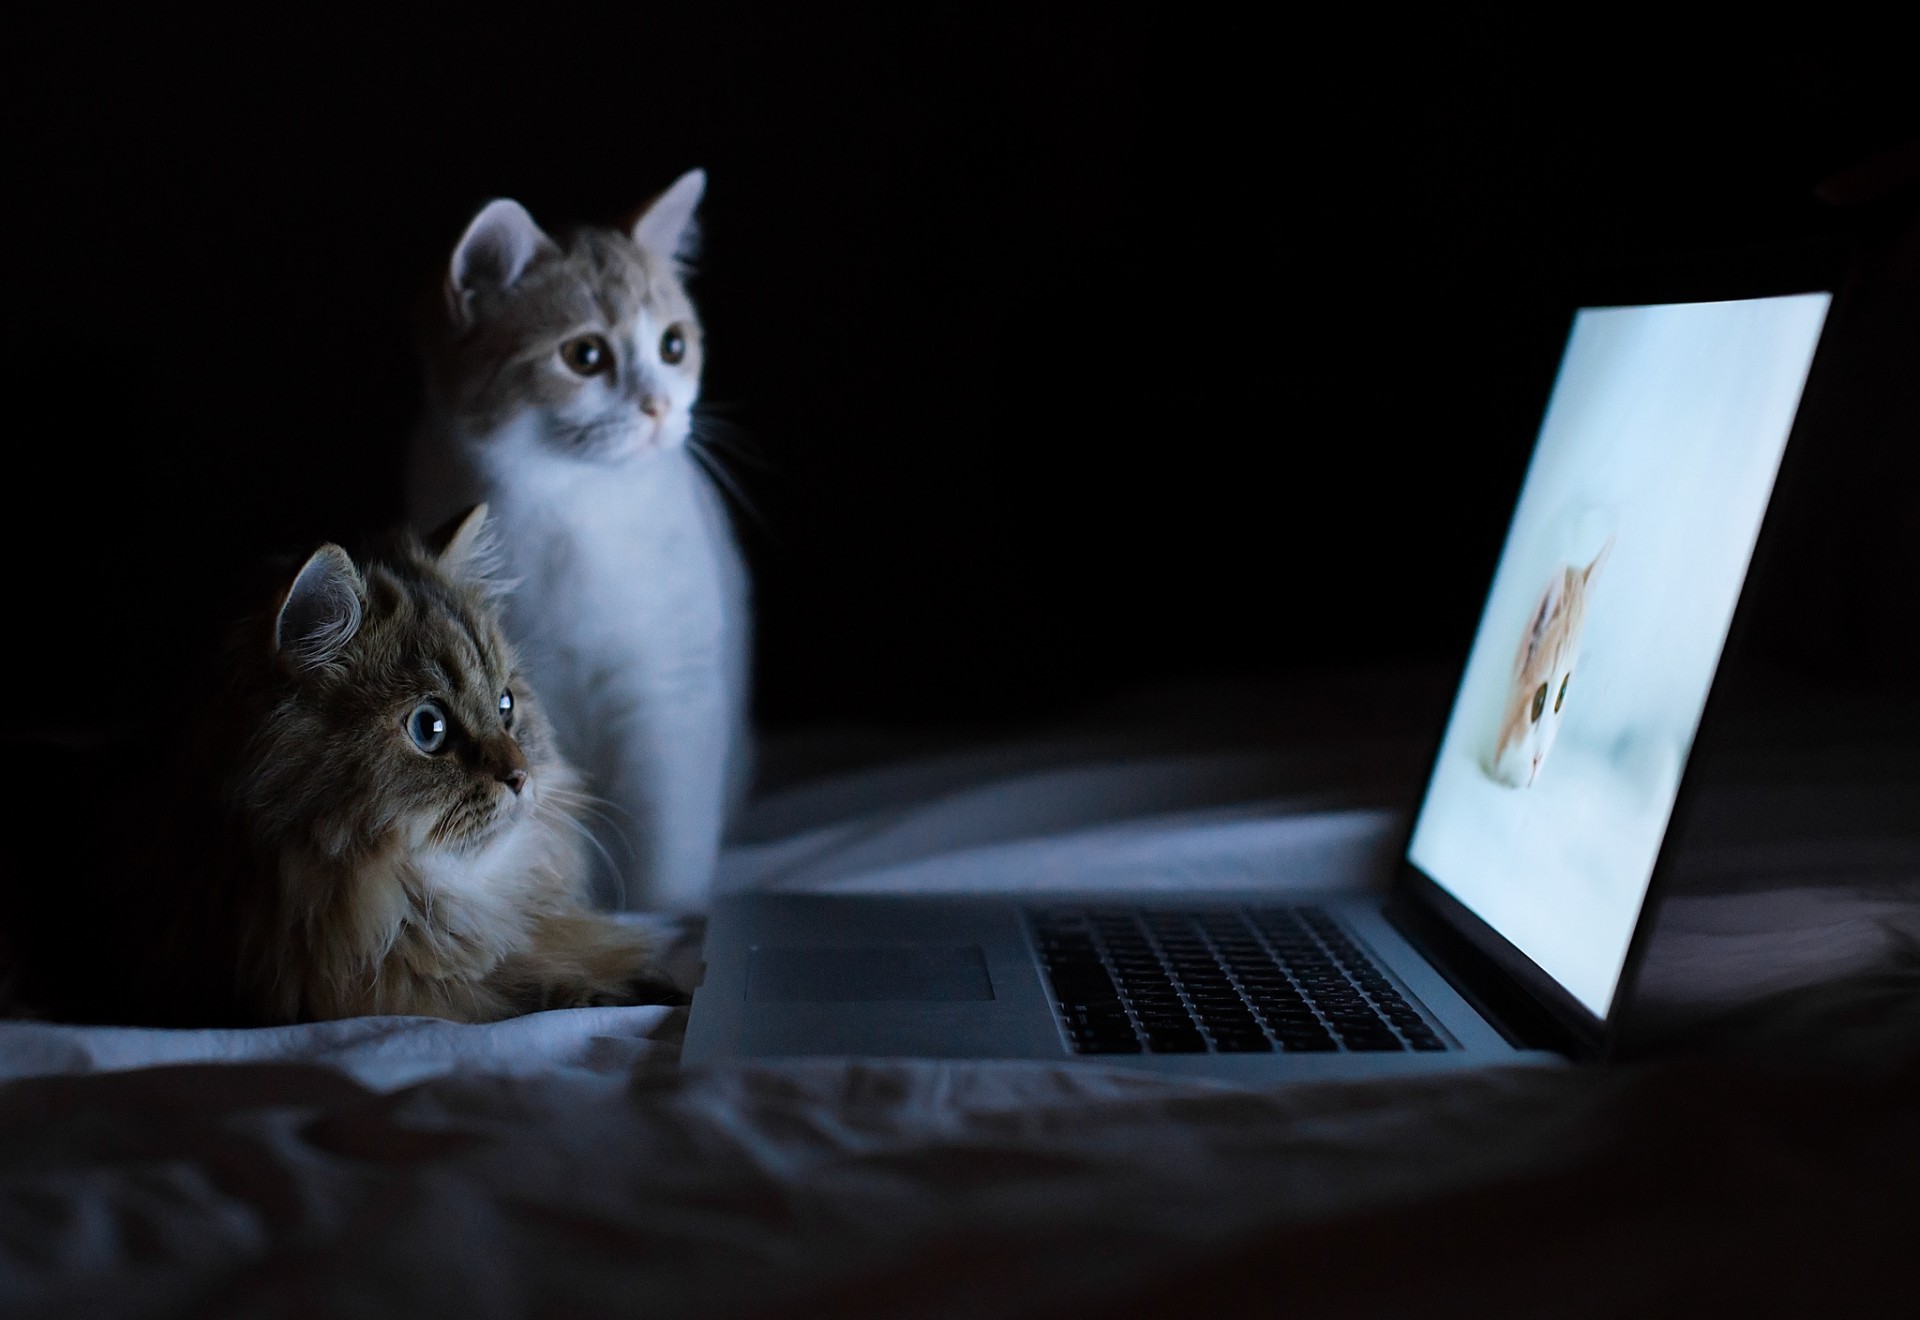 Two cats watching a cat on laptop screen Phone wallpapers